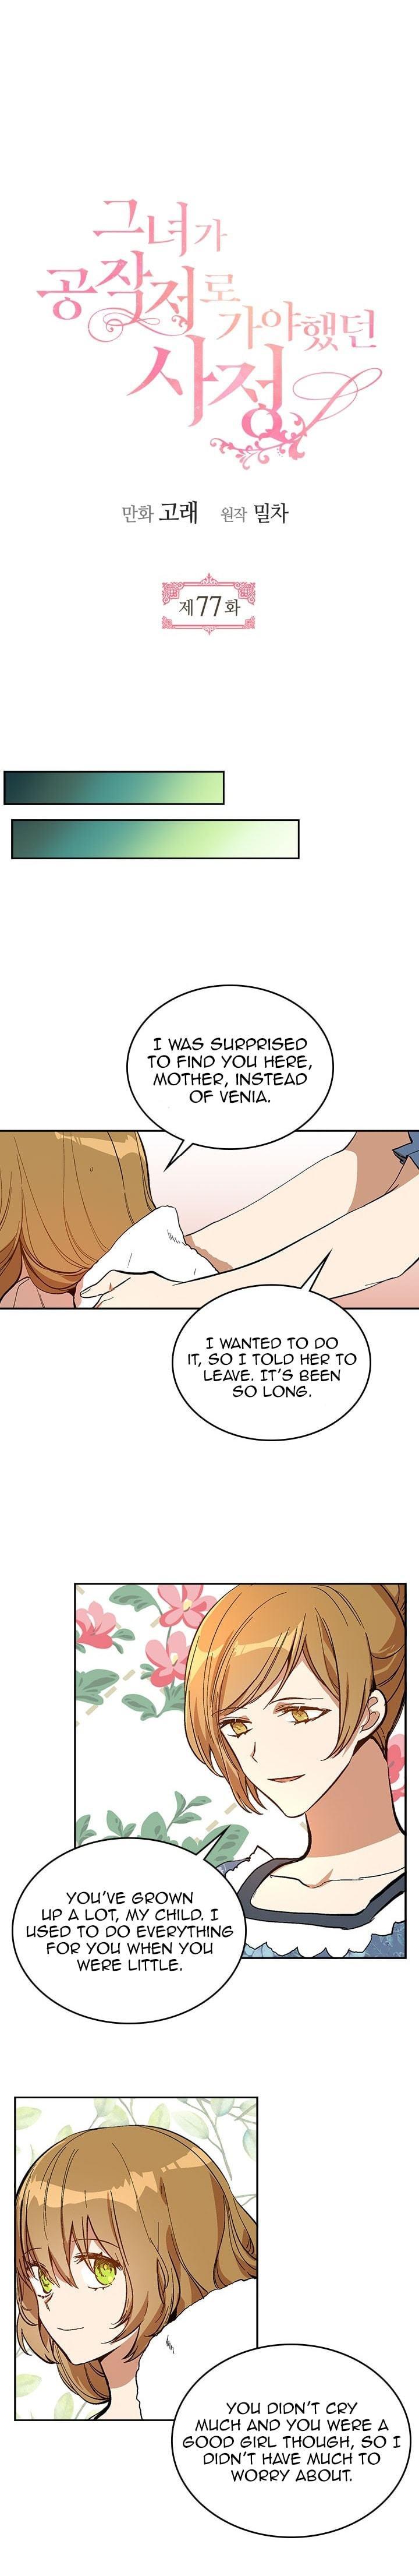 The Reason Why Raeliana Ended Up At The Duke’S Mansion - Page 3